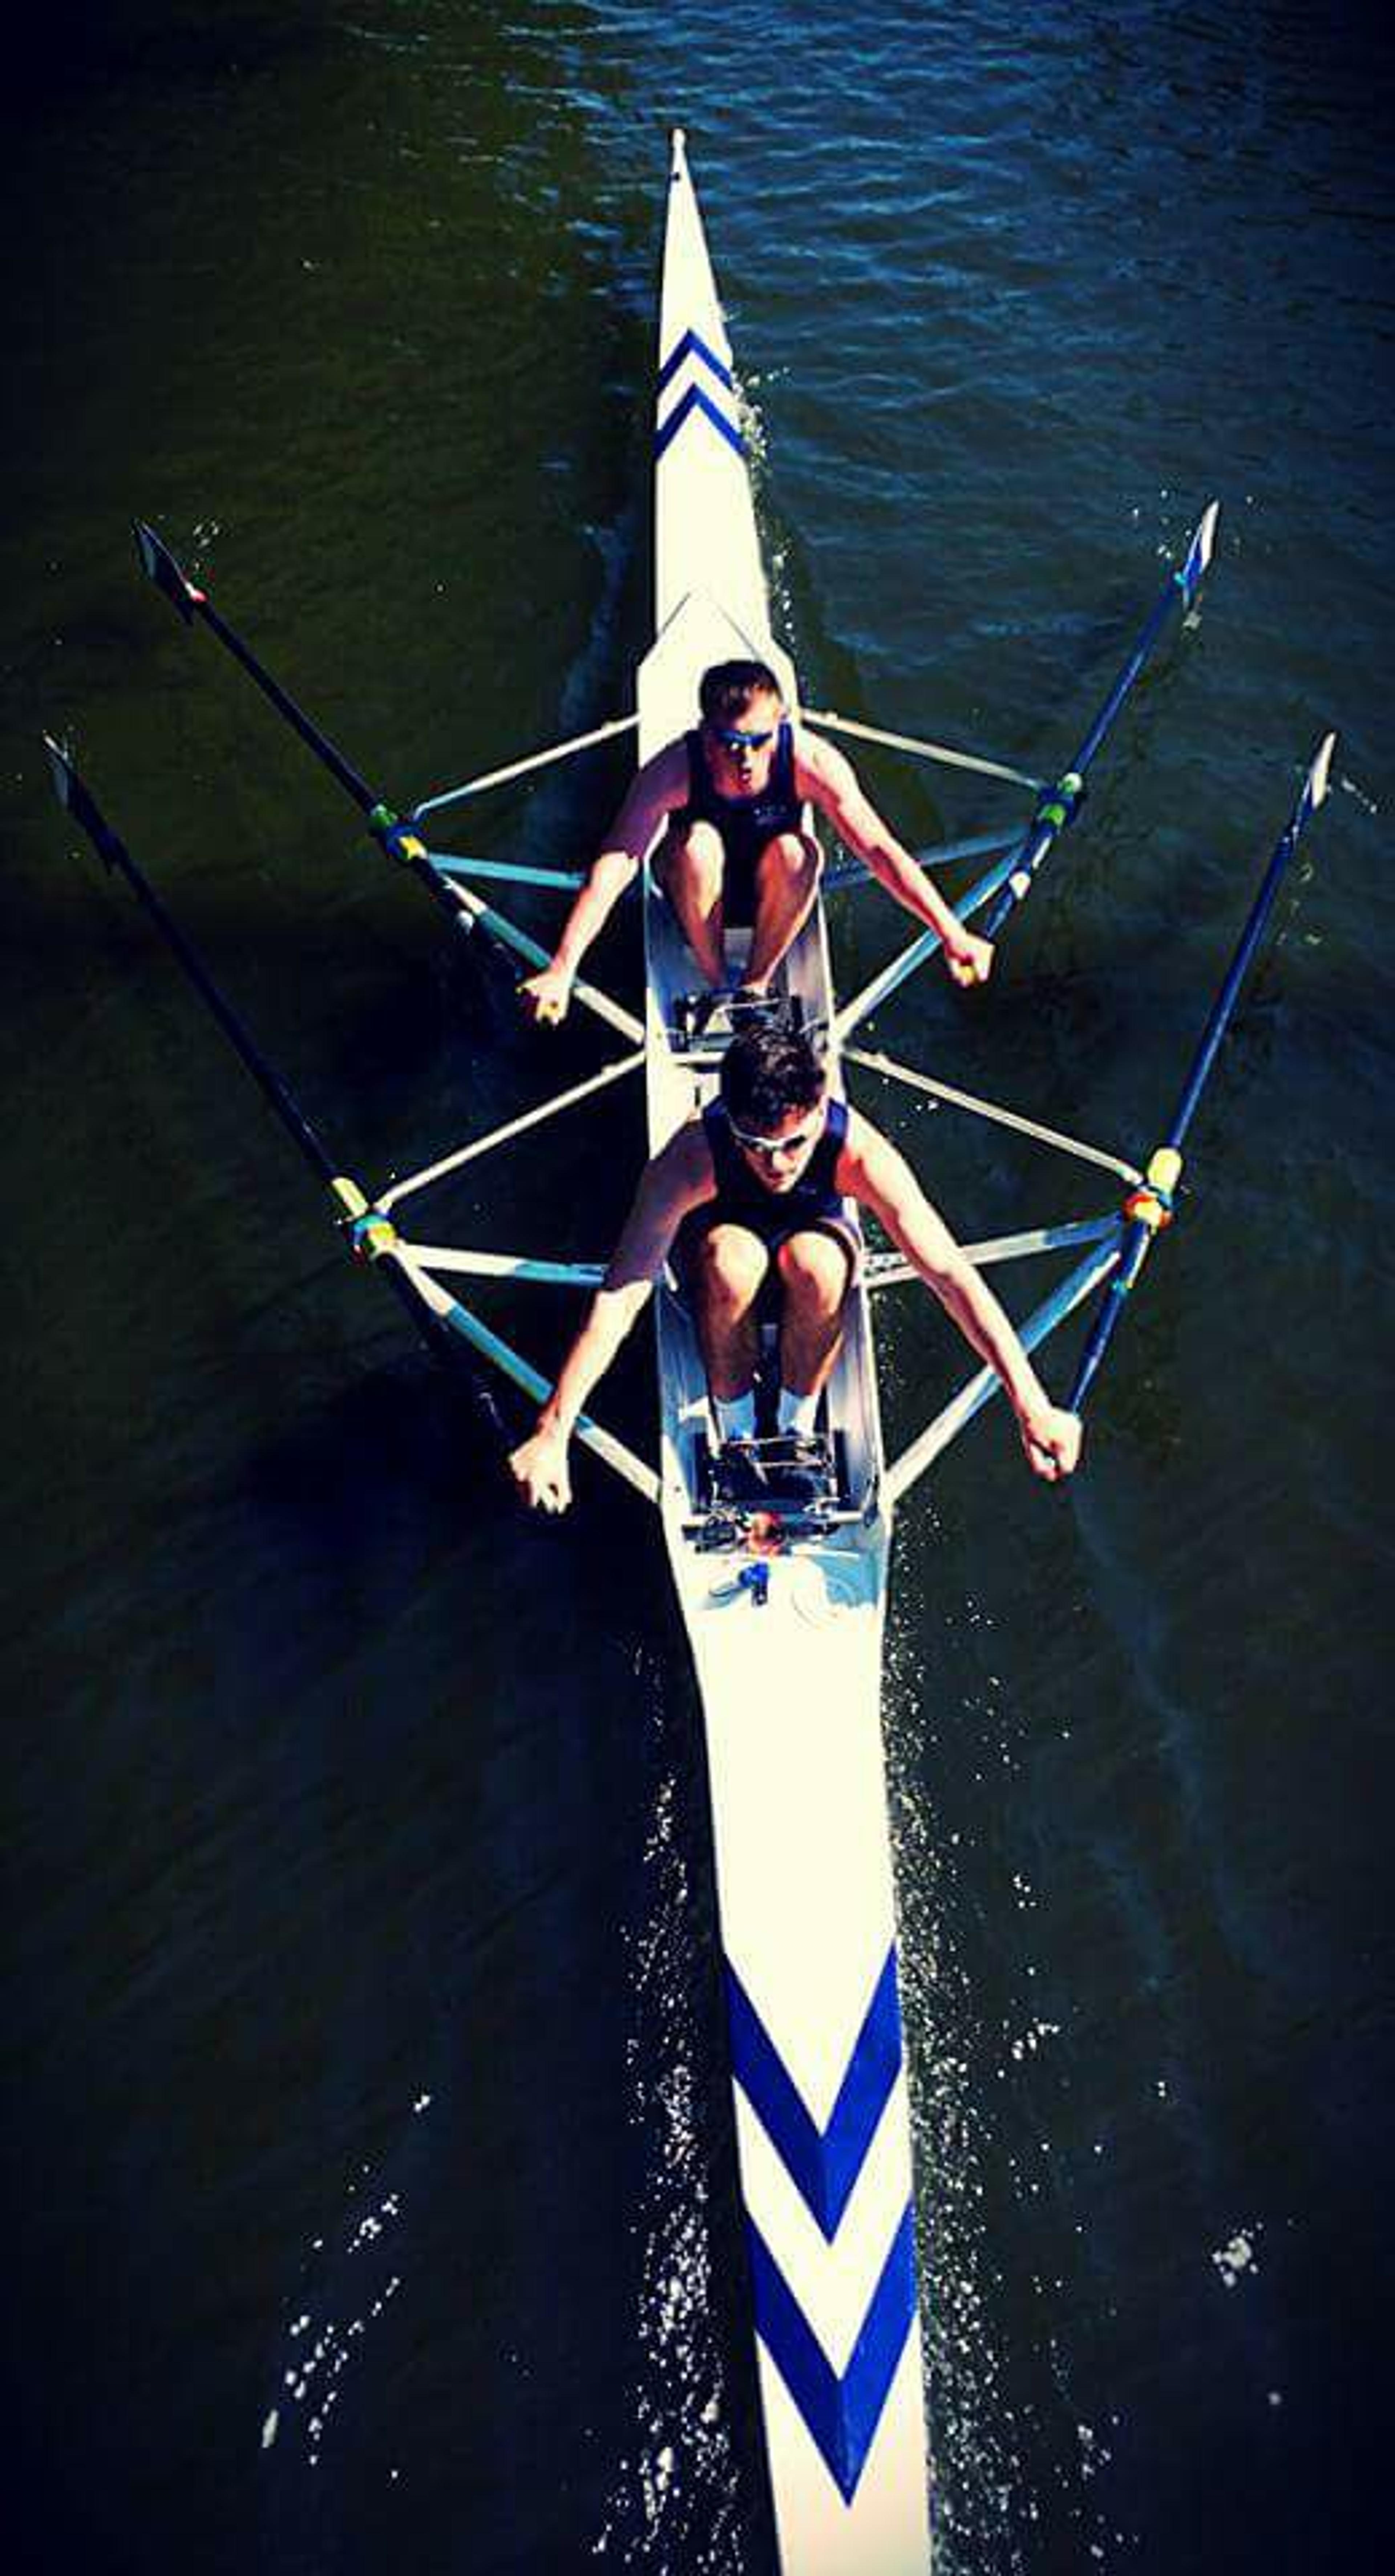 The J18 double, caught by the photographer at the catch.